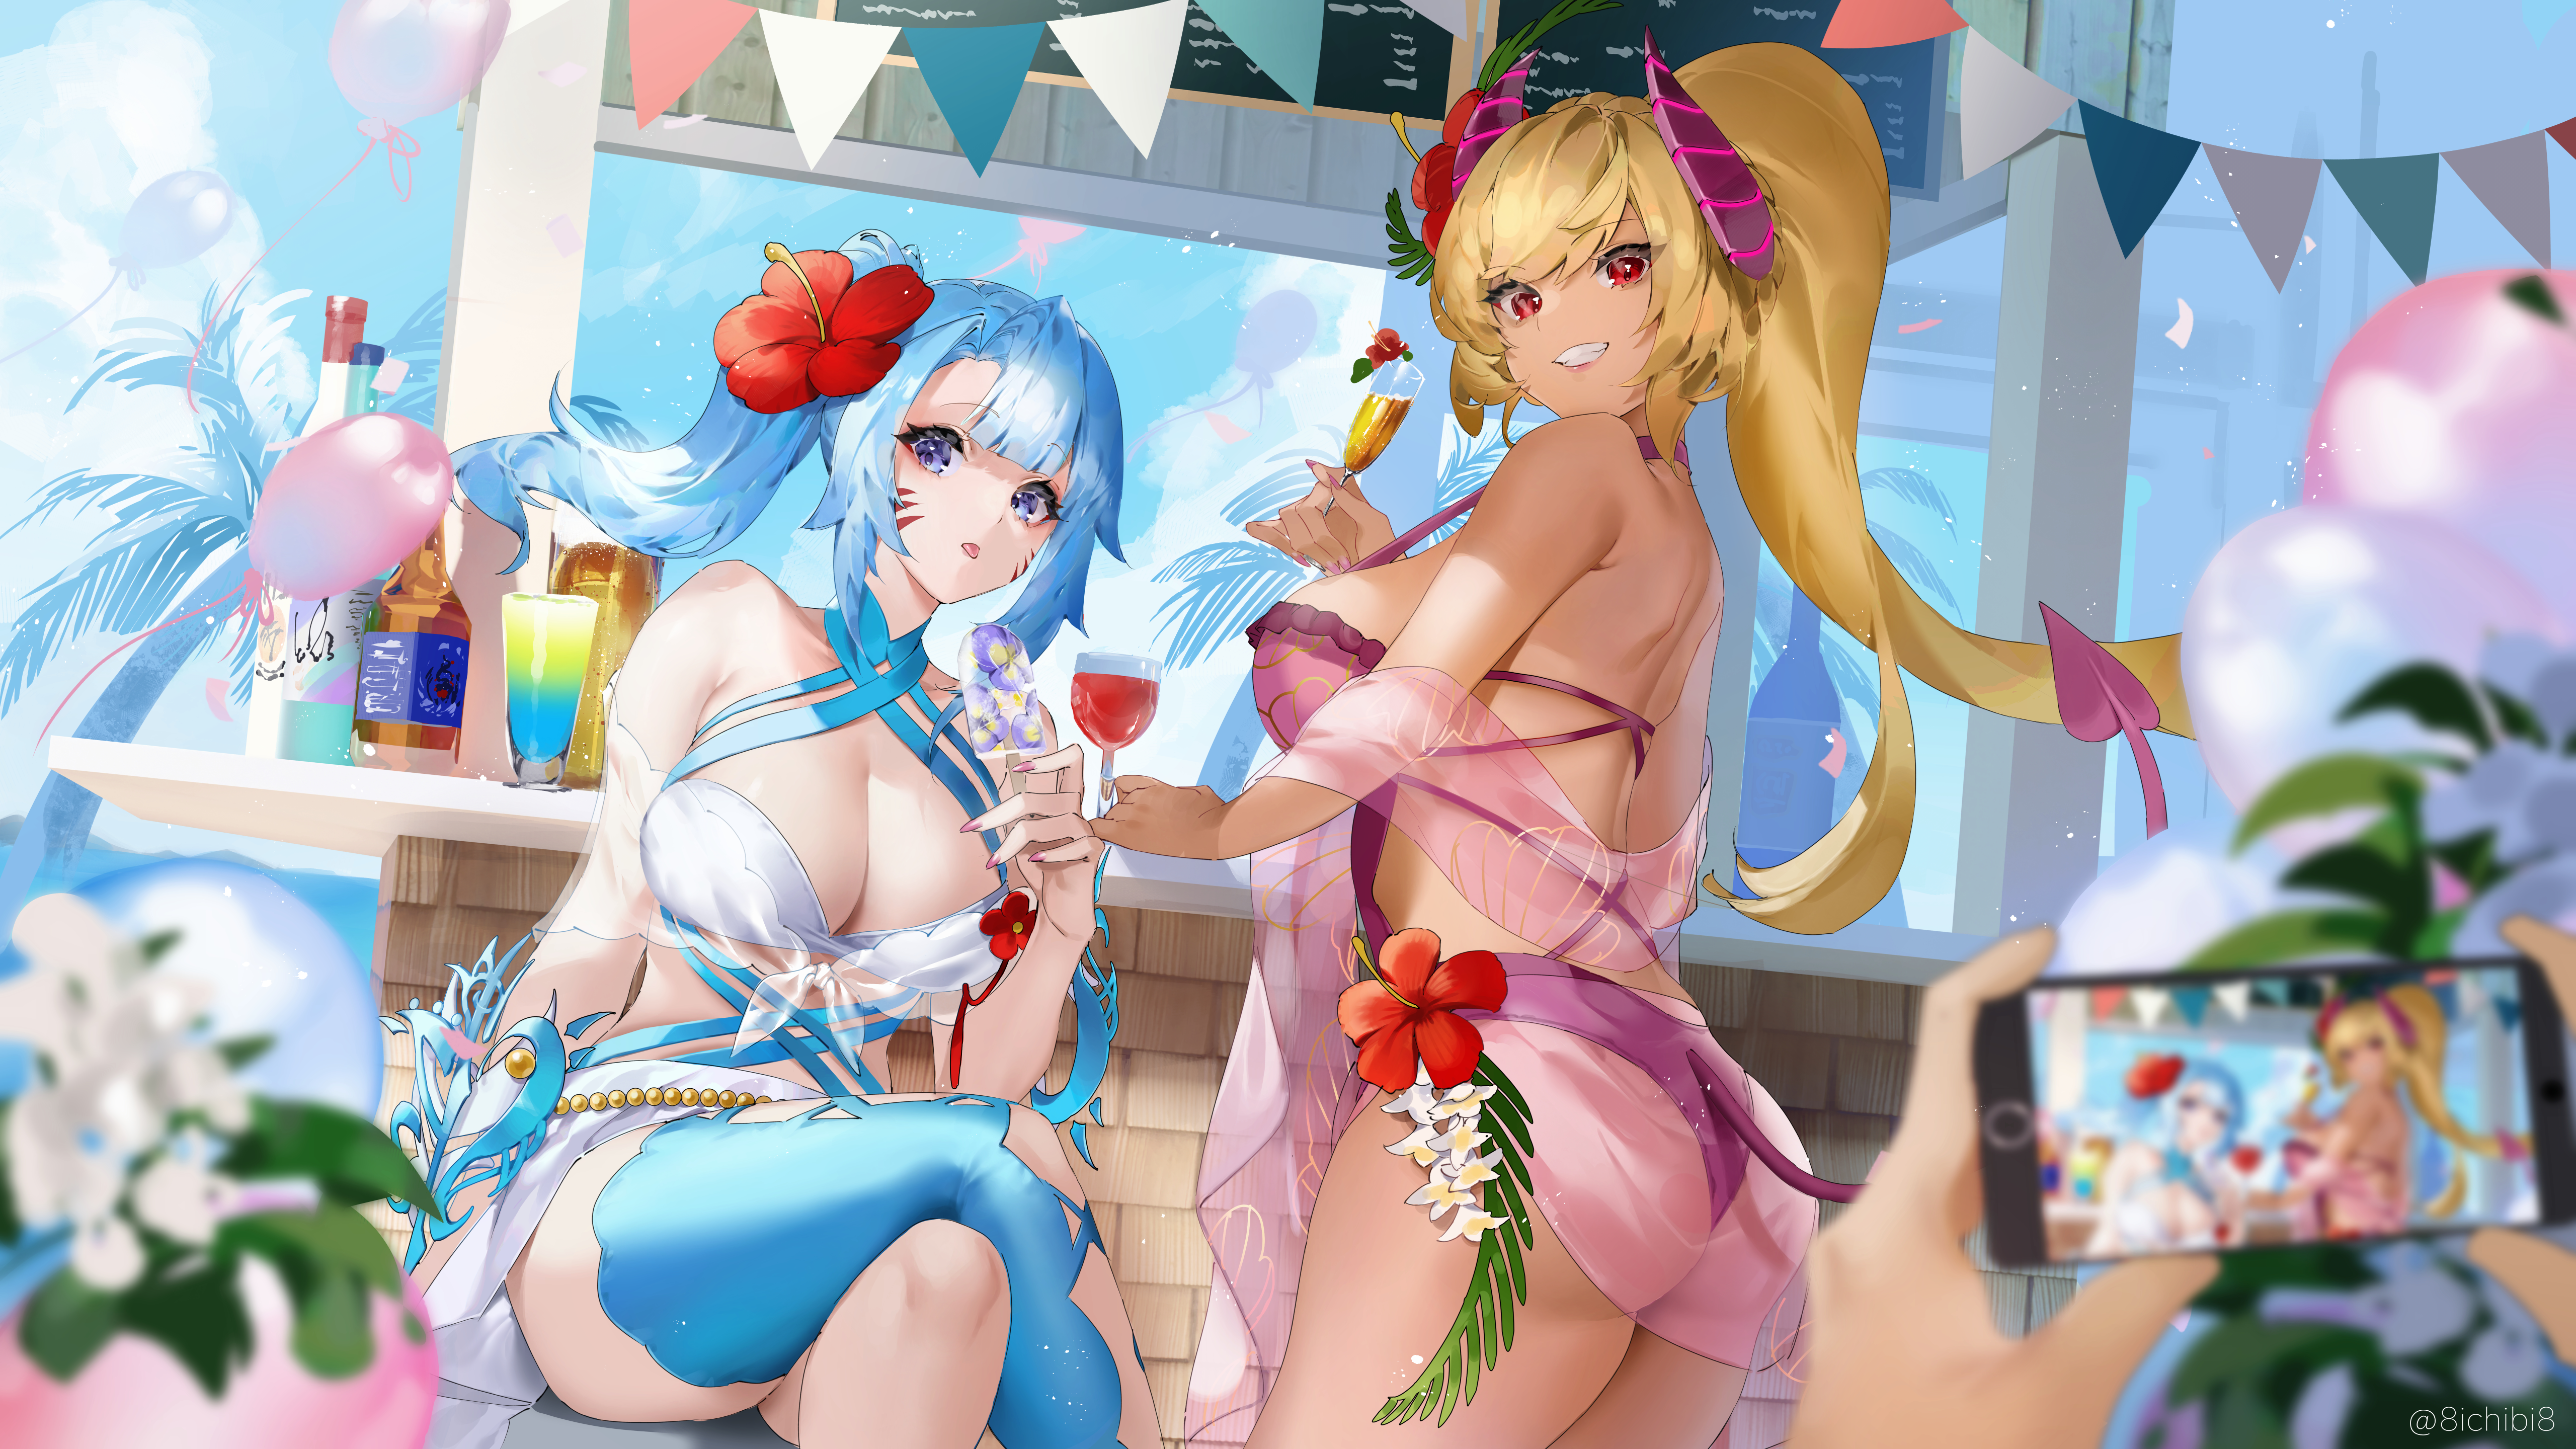 Anime 5120x2880 Ichibi two women anime girls looking back Akashic Chronicle horns tail legs crossed flowers hibiscus leaves long hair light blue hair boobs cleavage bikini swimwear alcohol red eyes blue eyes balloon sideboob bareback palm trees missing stocking ice cream wine glass eating smiling looking at viewer clouds Side ponytail ponytail anime girls eating tongue out taking photo flag POV bottles smartphone phone flower in hair